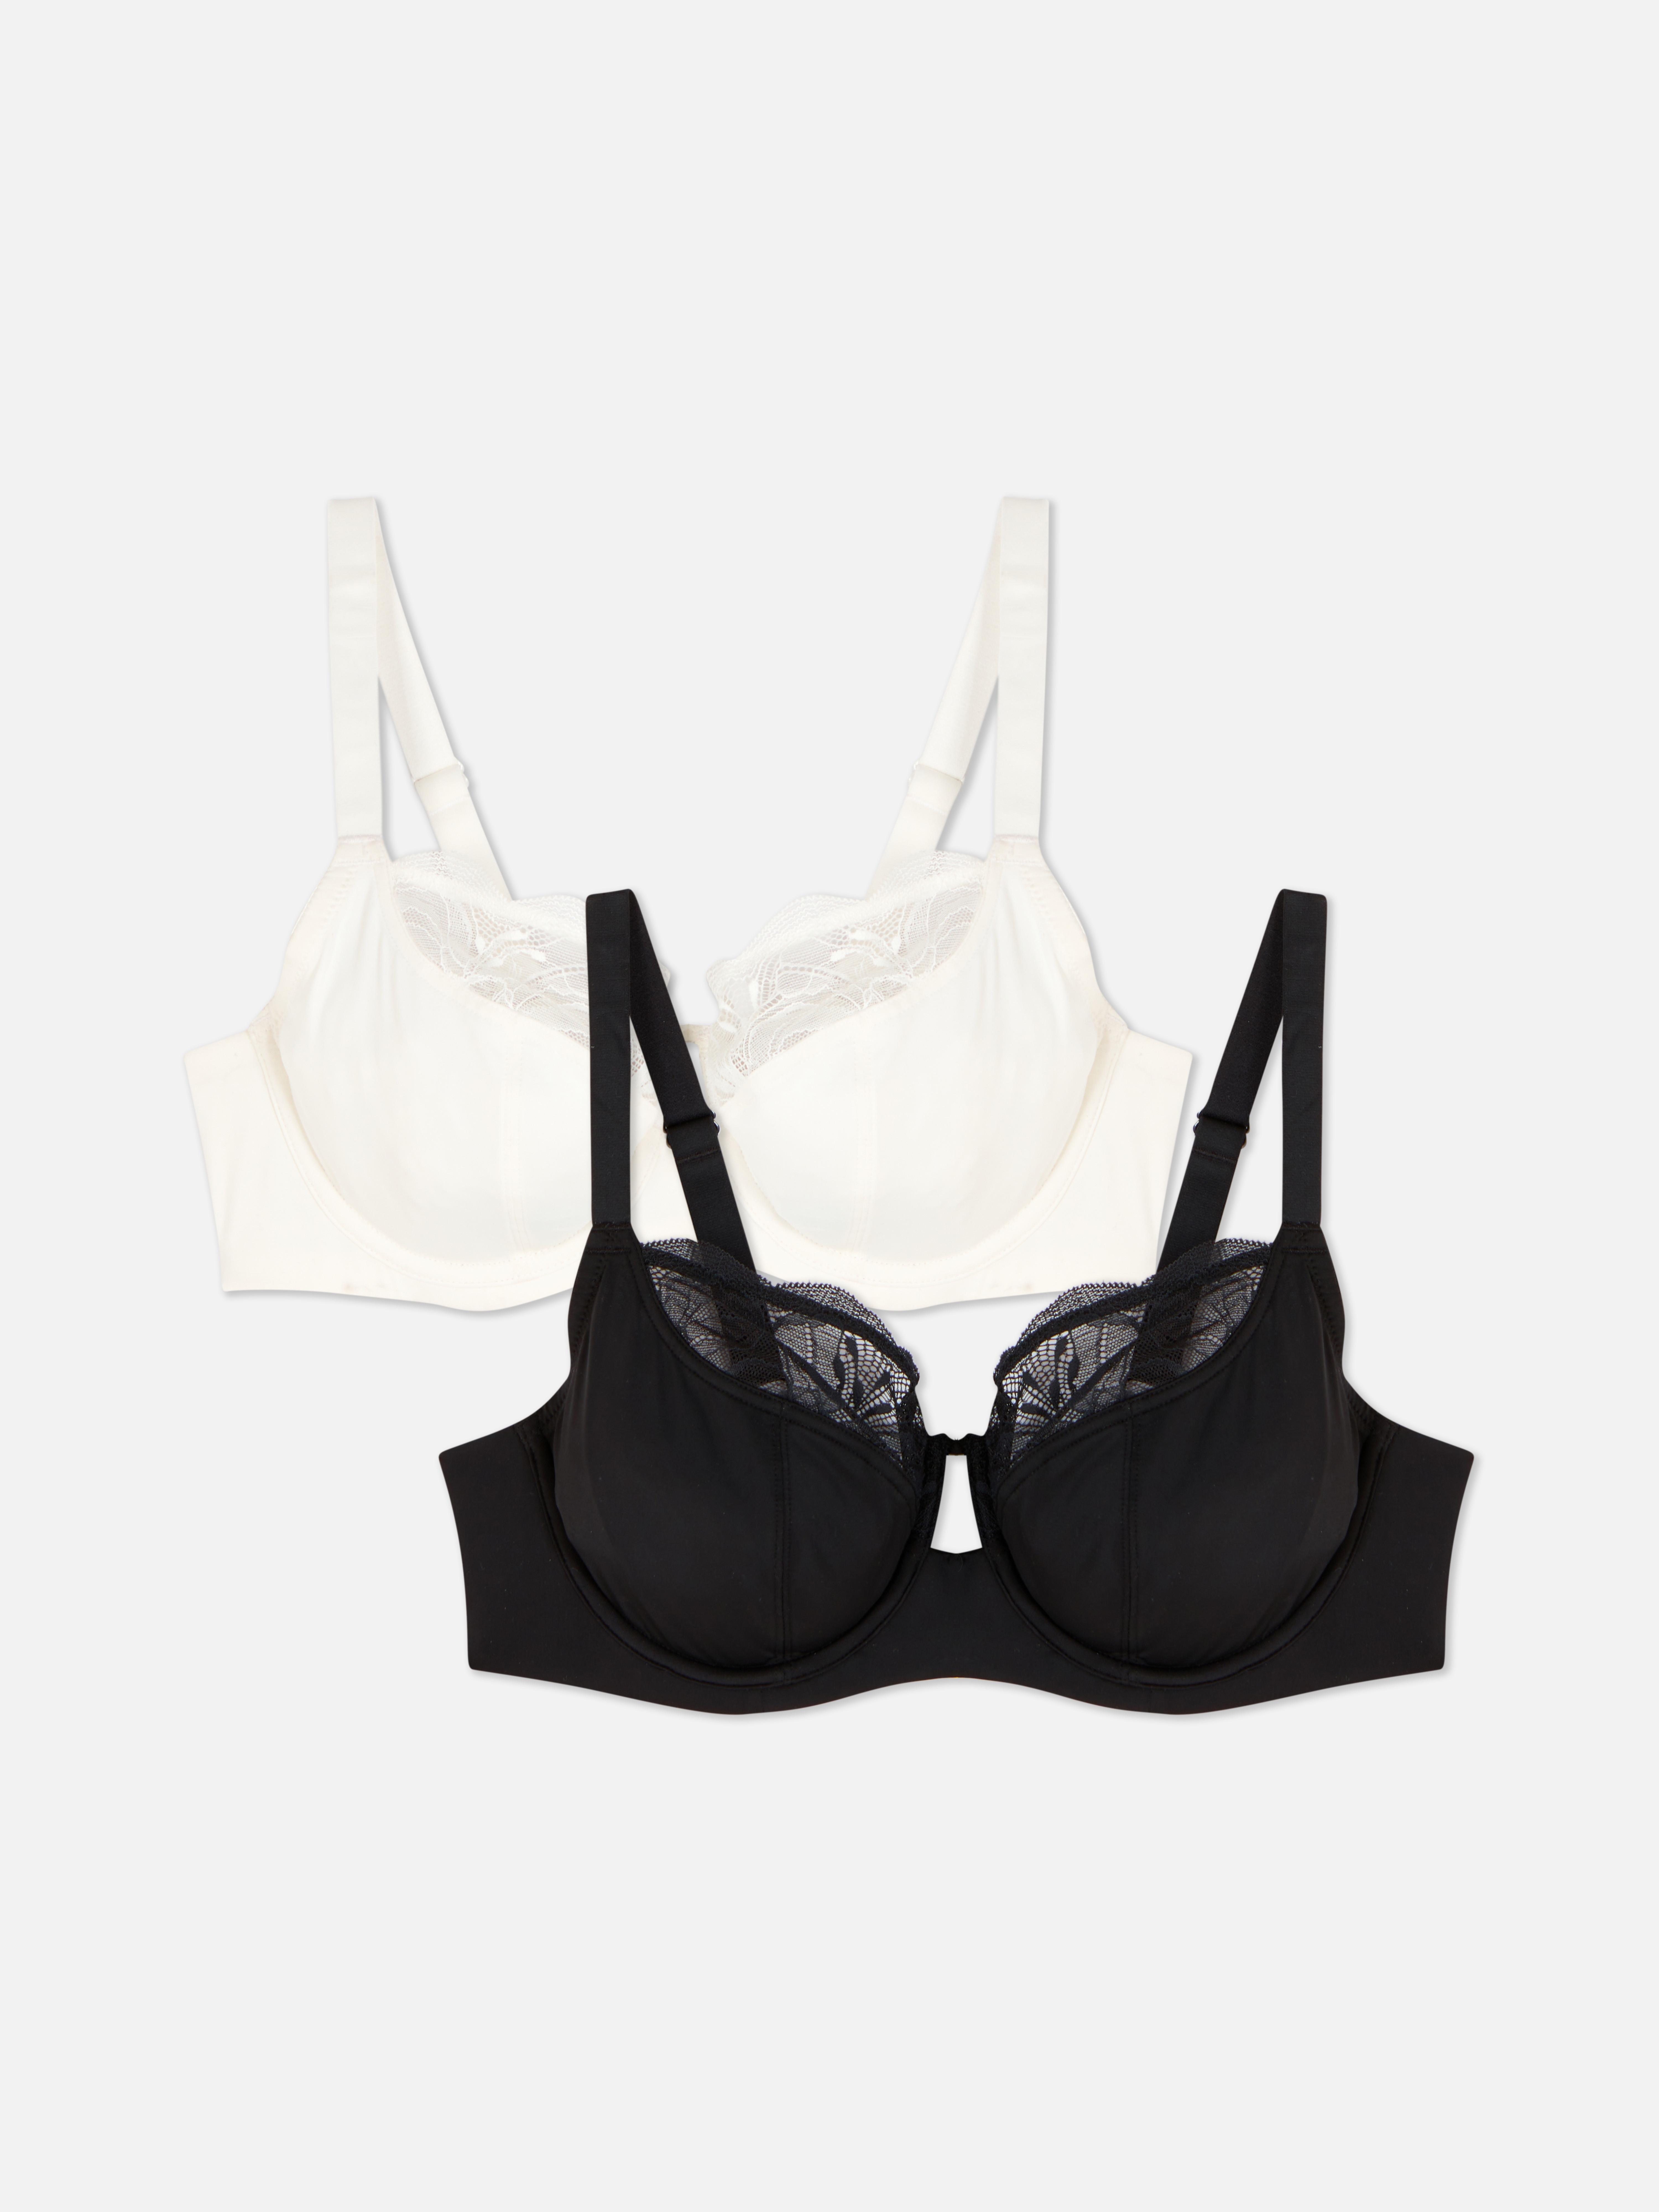 2pk D-G Non-Padded Full Cup Lace Bras